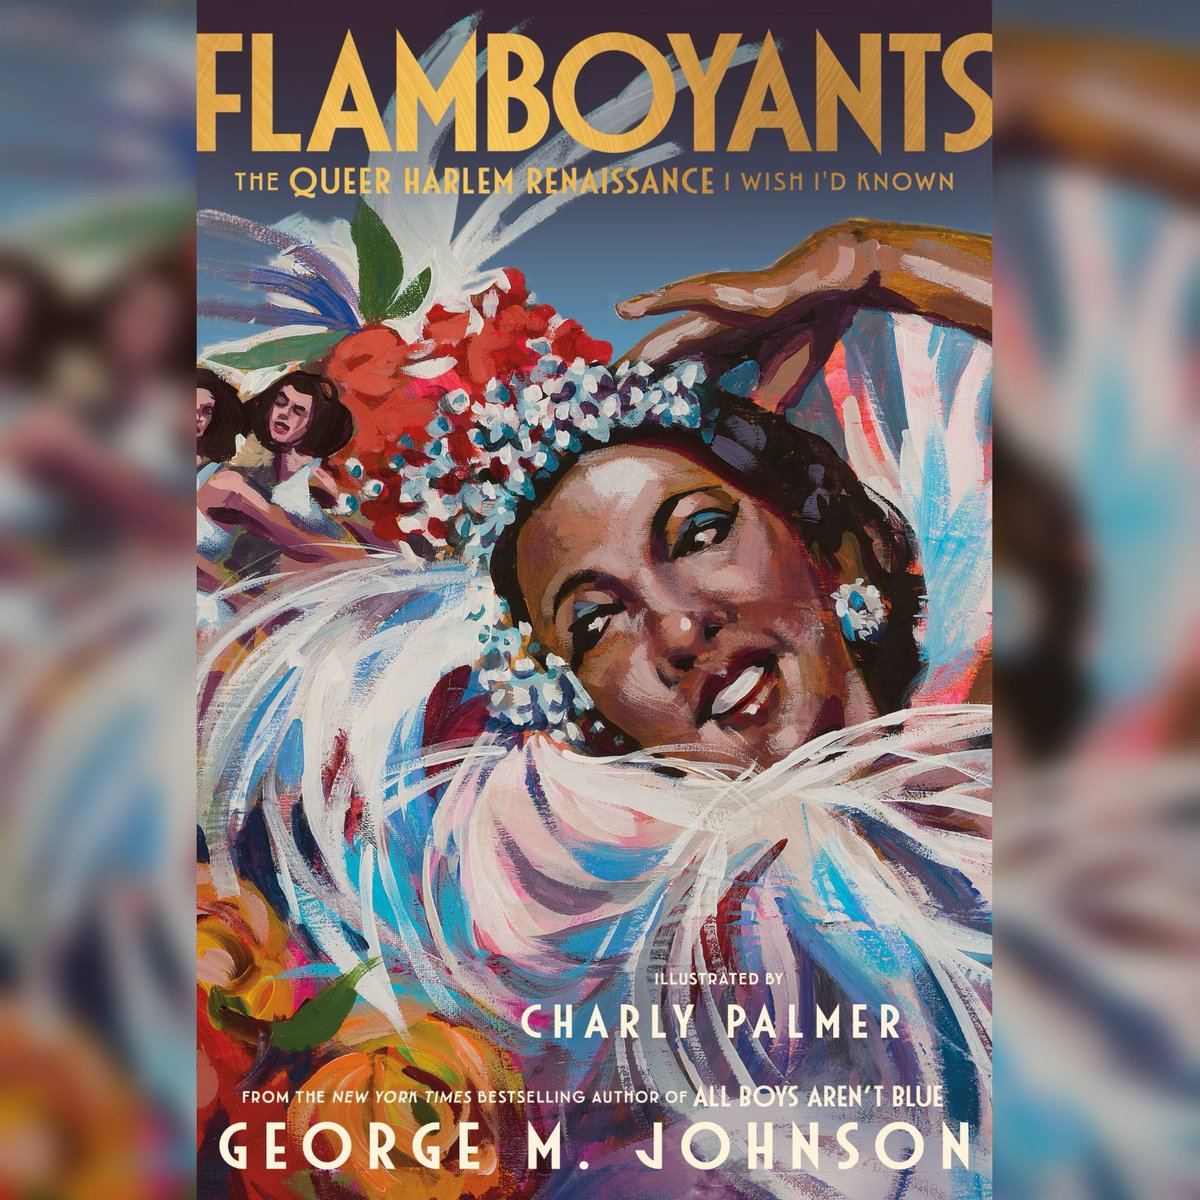 My new book Flamboyants about the Harlem Renaissance is available for preorder: a.co/d/gMeR2K4